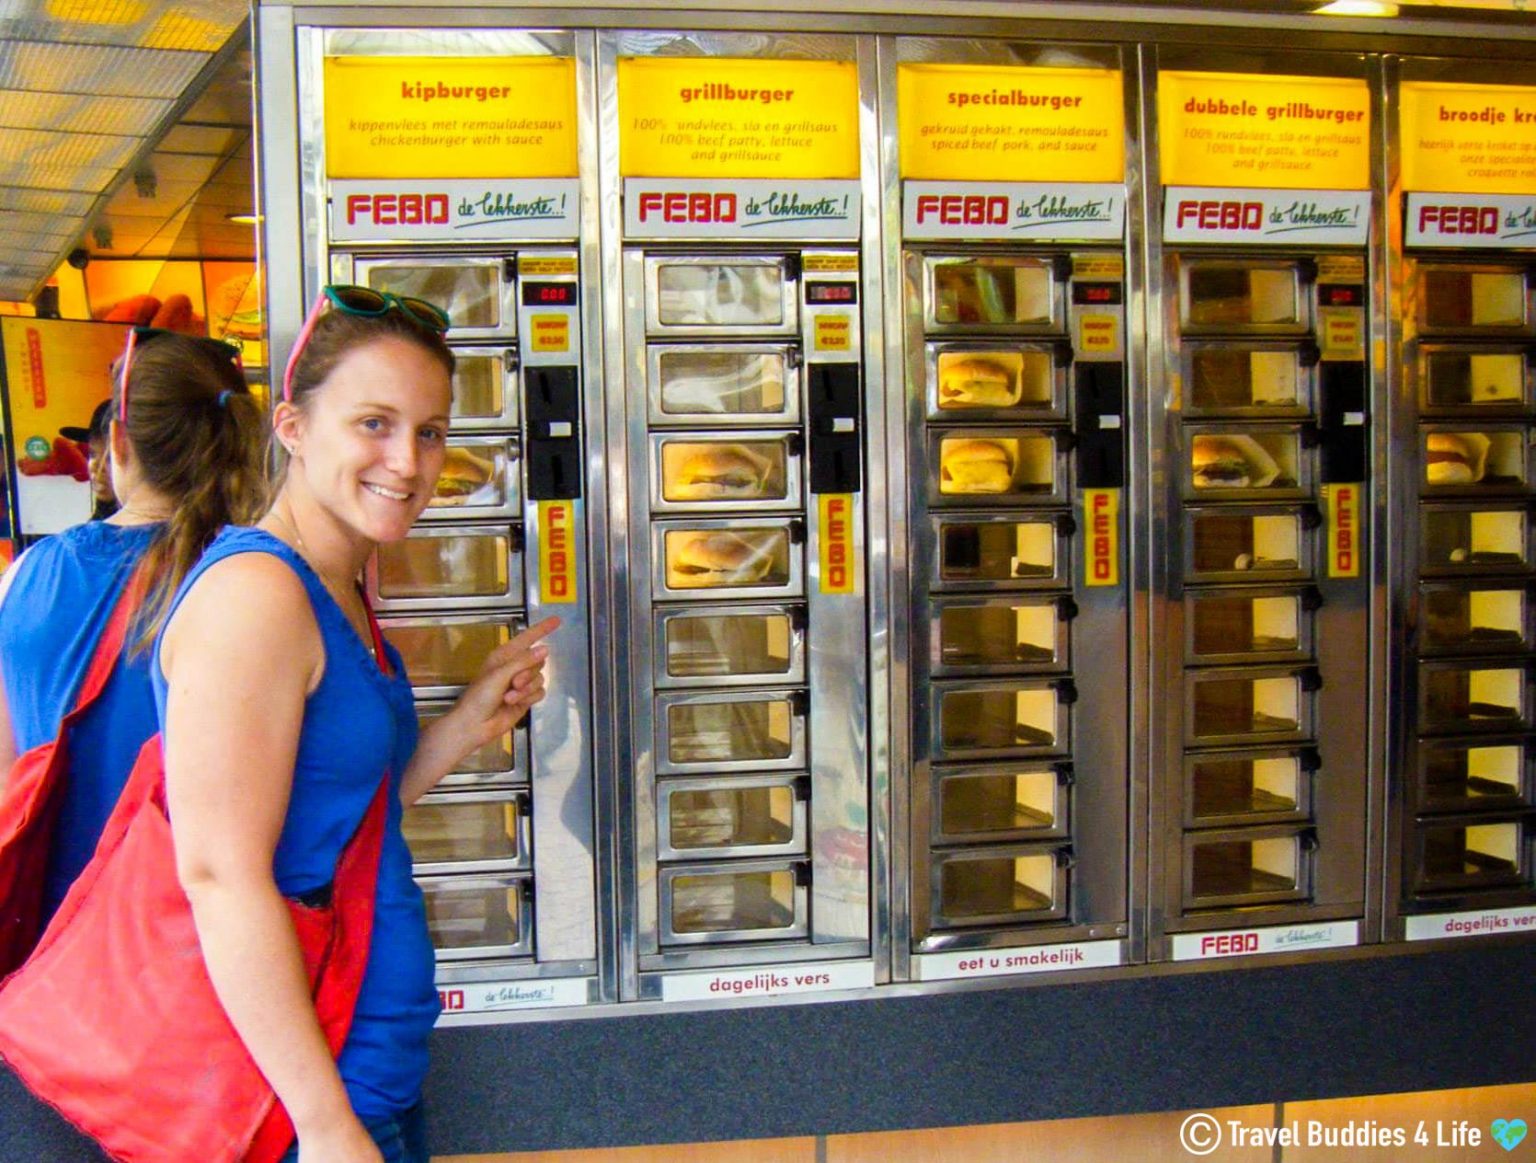 A Dutch Fast Food Restaurant Called The Febo A Delicious Place To Eat Europe 1536x1163 